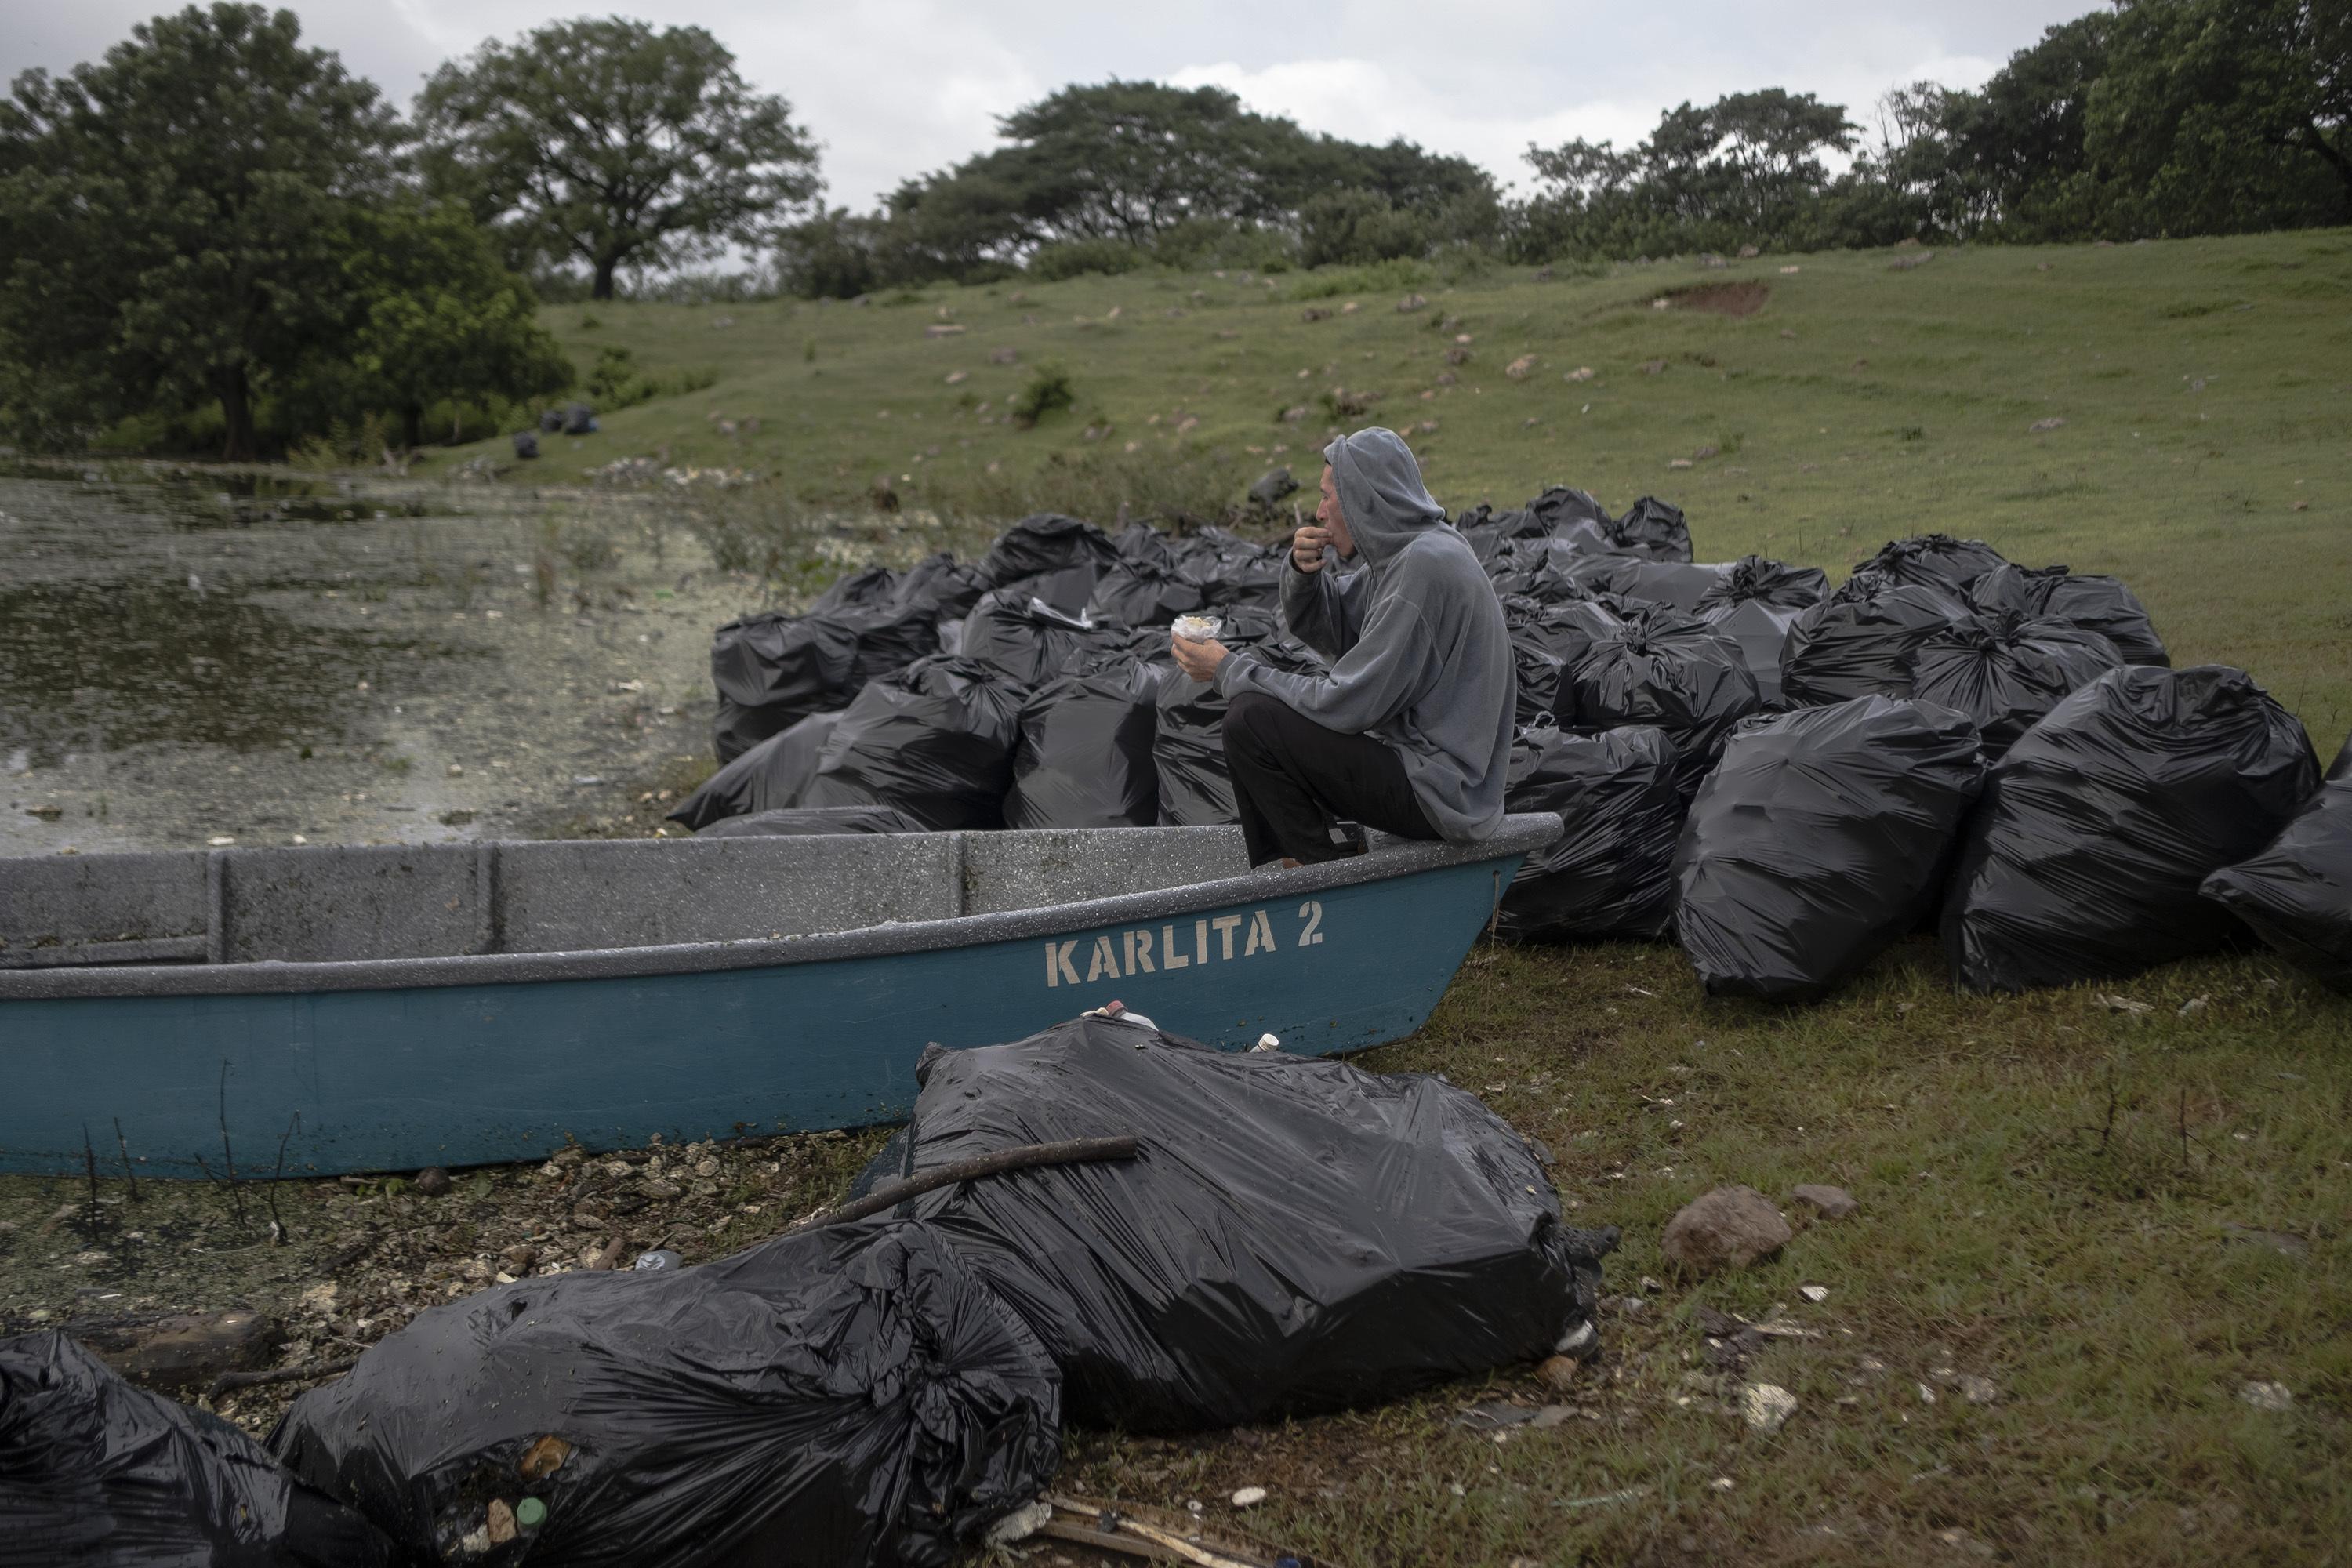 Óscar Menjívar, 45, eats his breakfast in a boat surrounded by bags full of garbage on the shore of the Cerrón Grande reservoir. Since the waste has polluted the water, his workdays as a spearfisherman have been reduced: “Spearfishing is impossible. In order to shoot, you must be able to see your target, and the garbage has created a layer so thick that not even light enters the water in many places,” he said.